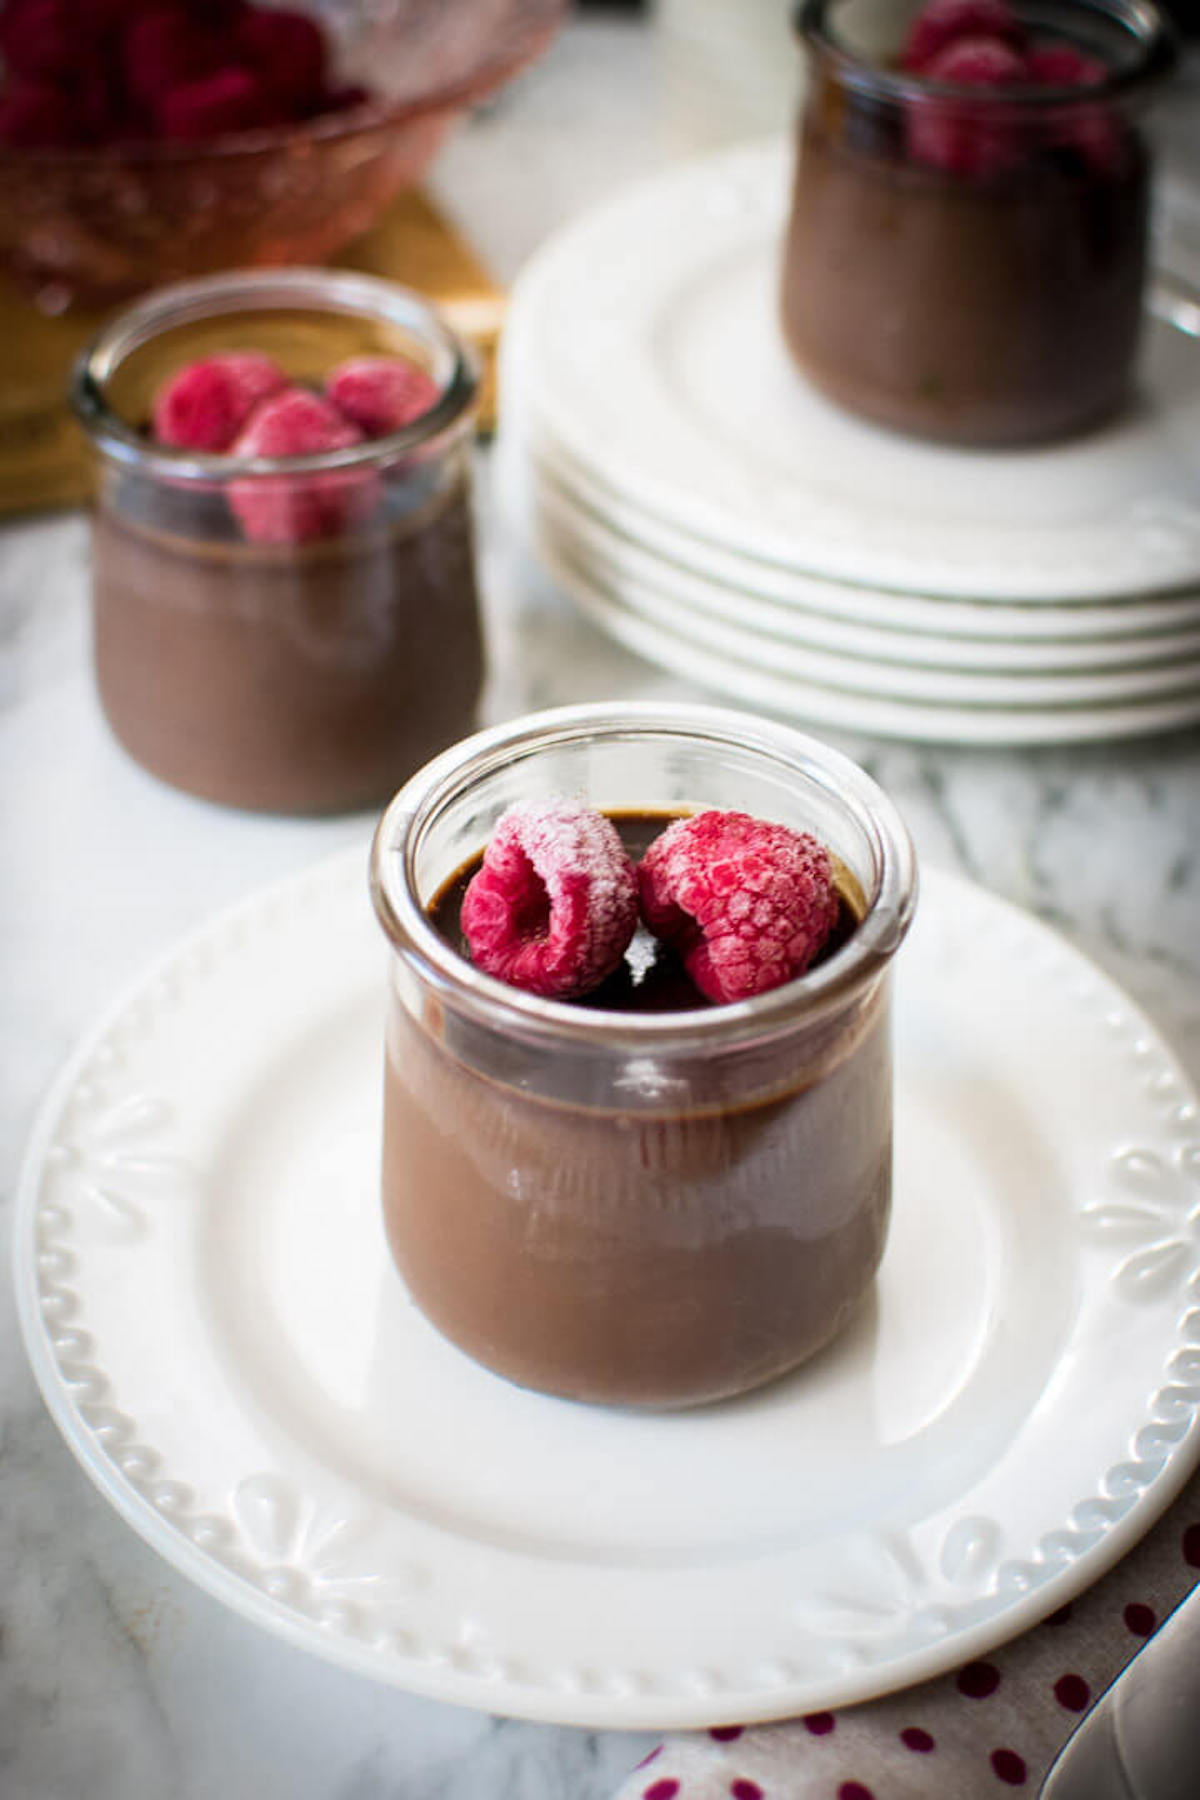 Closeup of a jar of chocolate custard with raspberries on top, jar is on a white plate